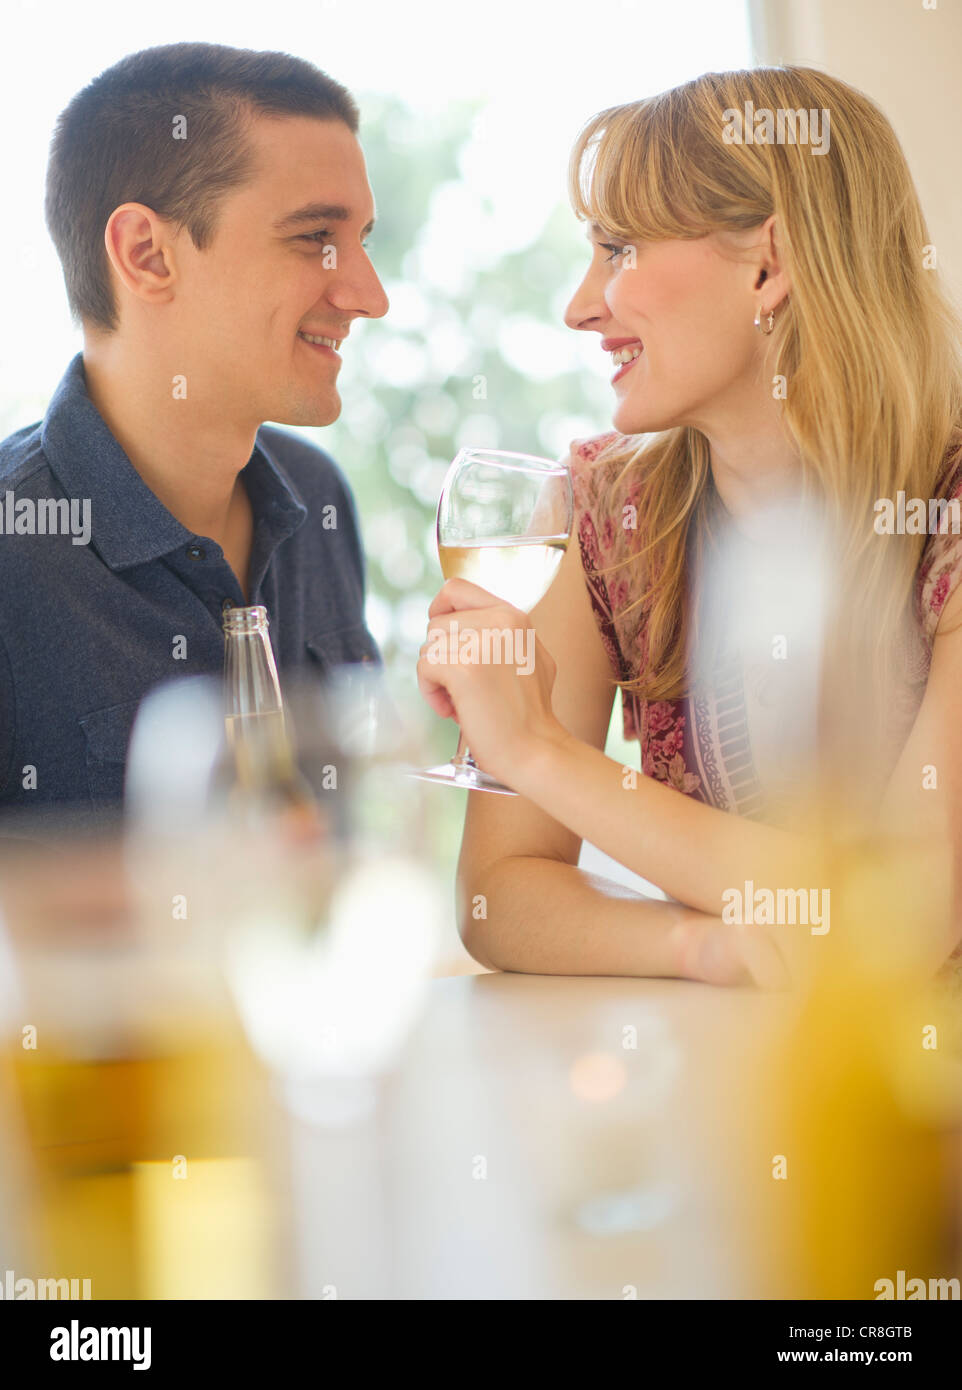 USA, New Jersey, Jersey City, Couple drinking wine Banque D'Images